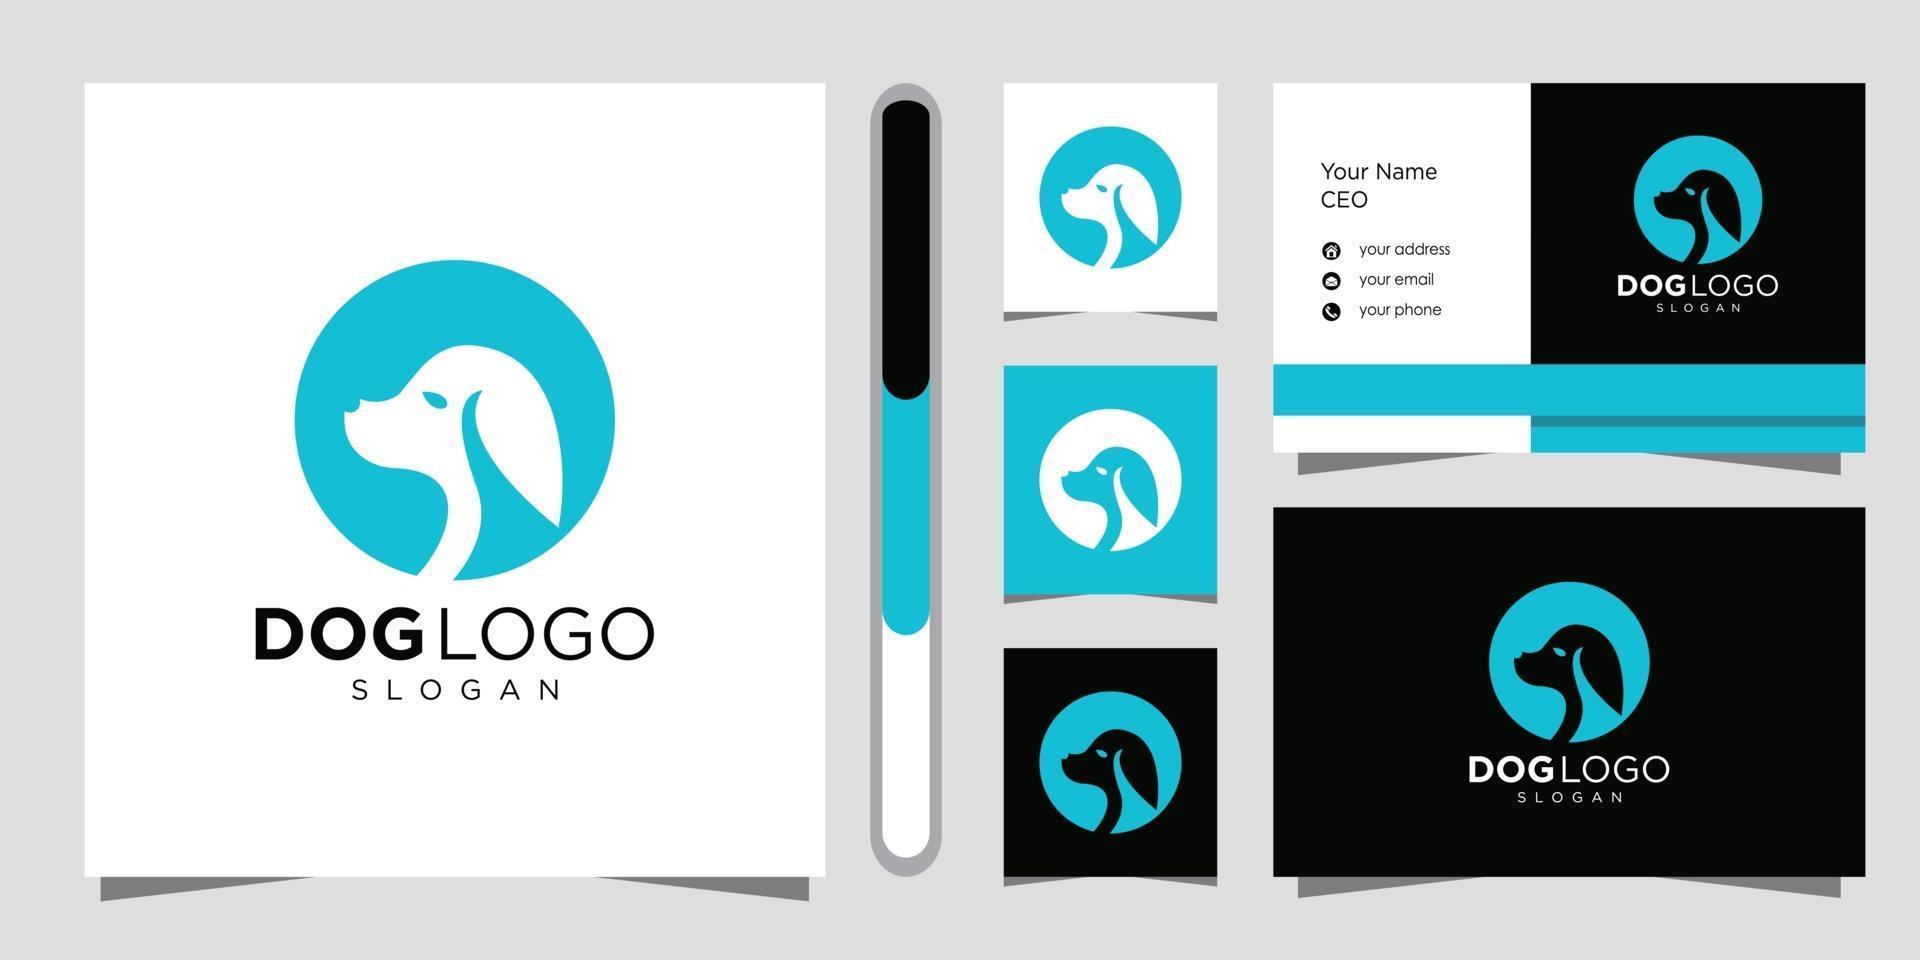 Dog logo design and business card. vector